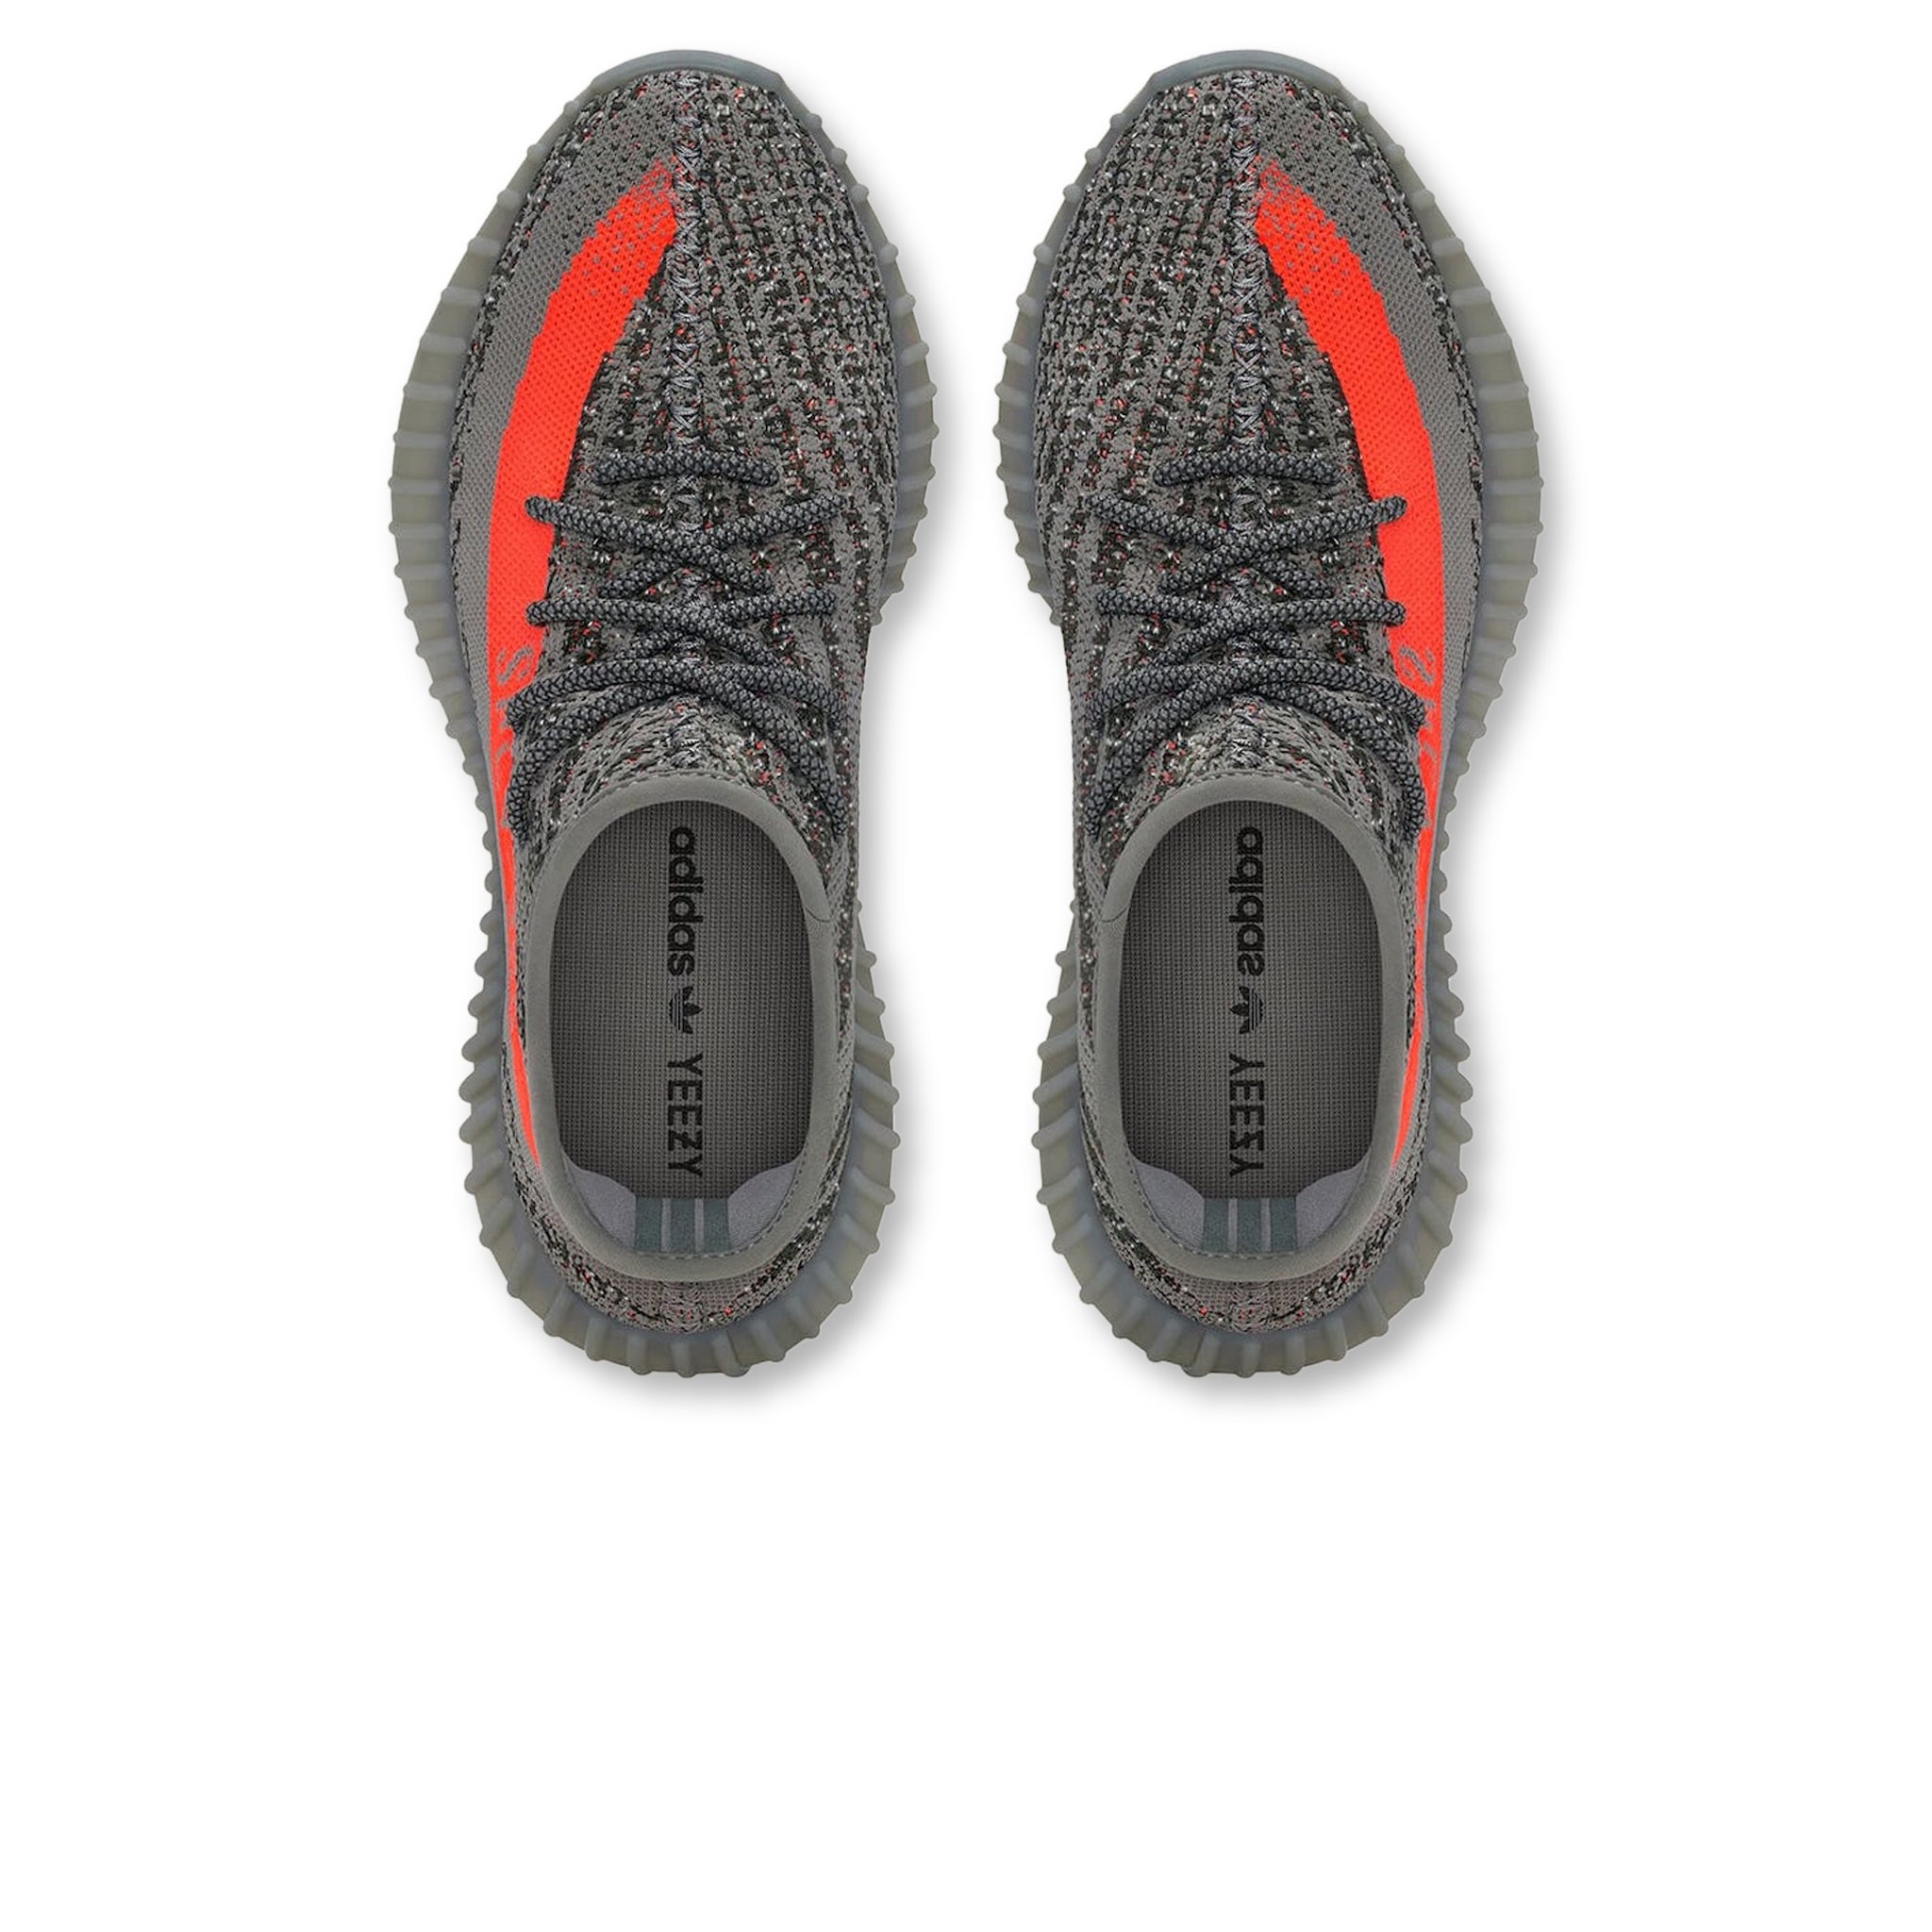 Top down view of Adidas Yeezy Boost 350 V2 Beluga Reflective GW1229